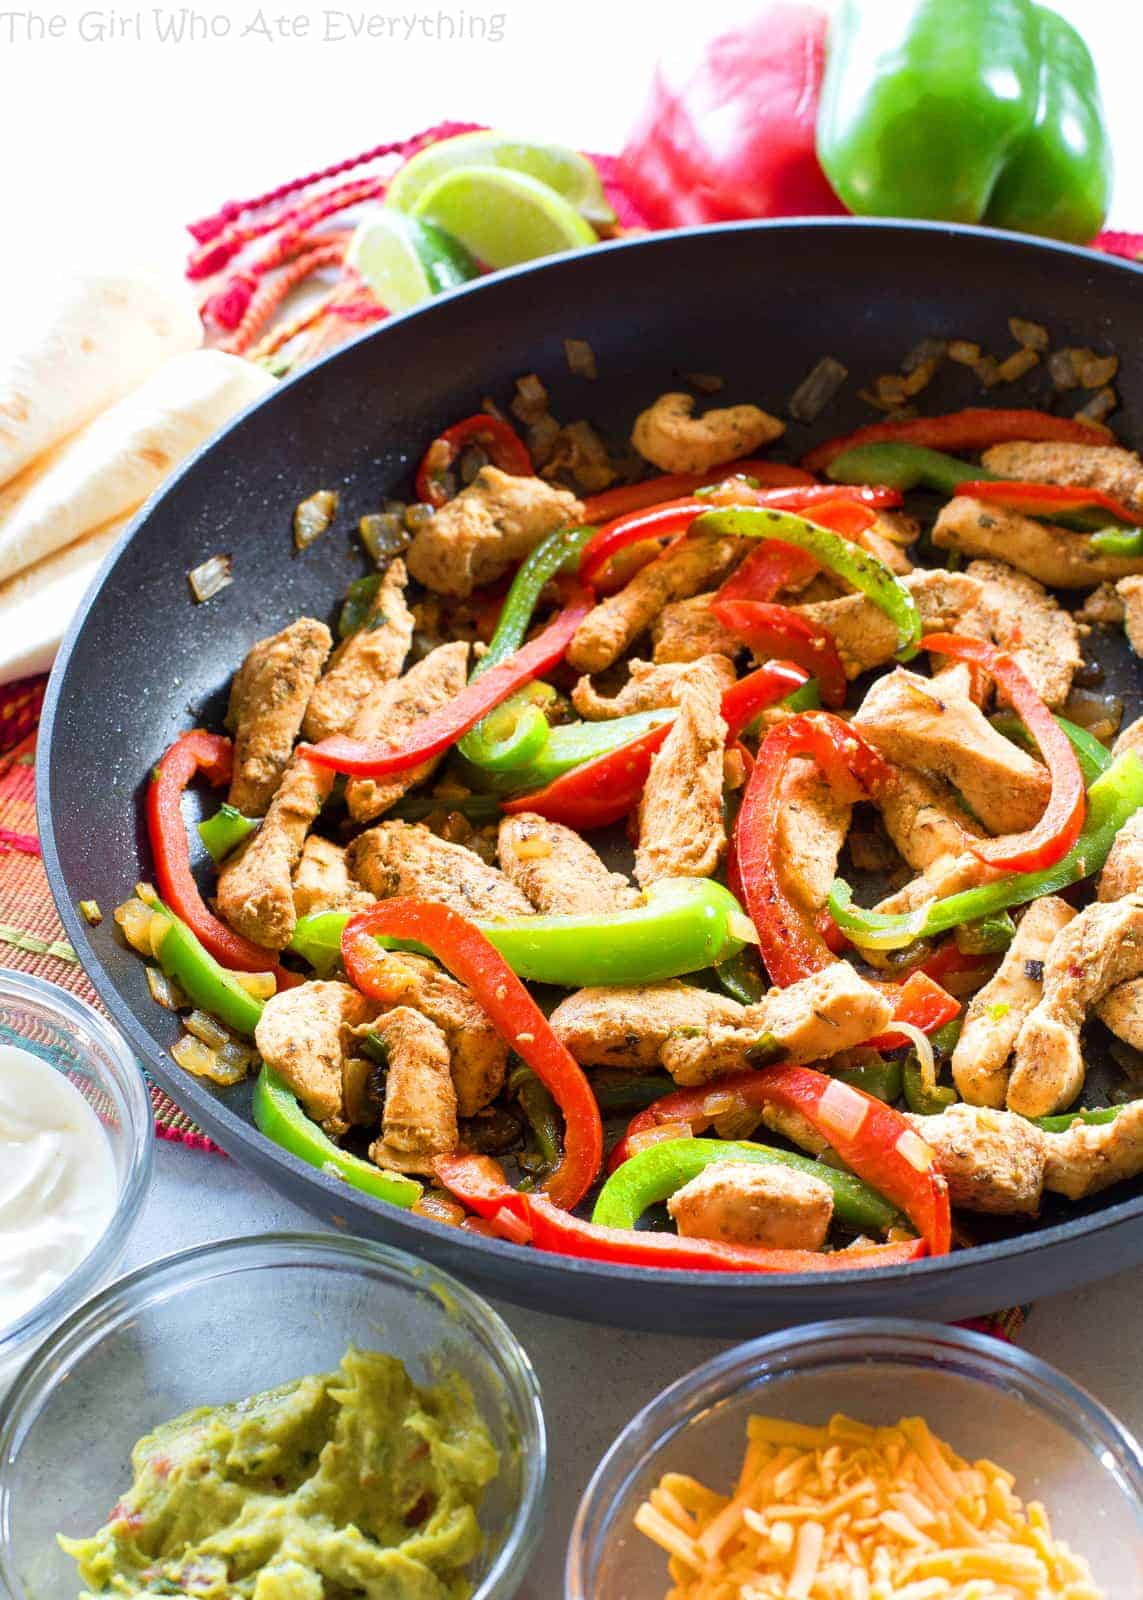 Easy Chicken Fajitas - The Girl Who Ate Everything